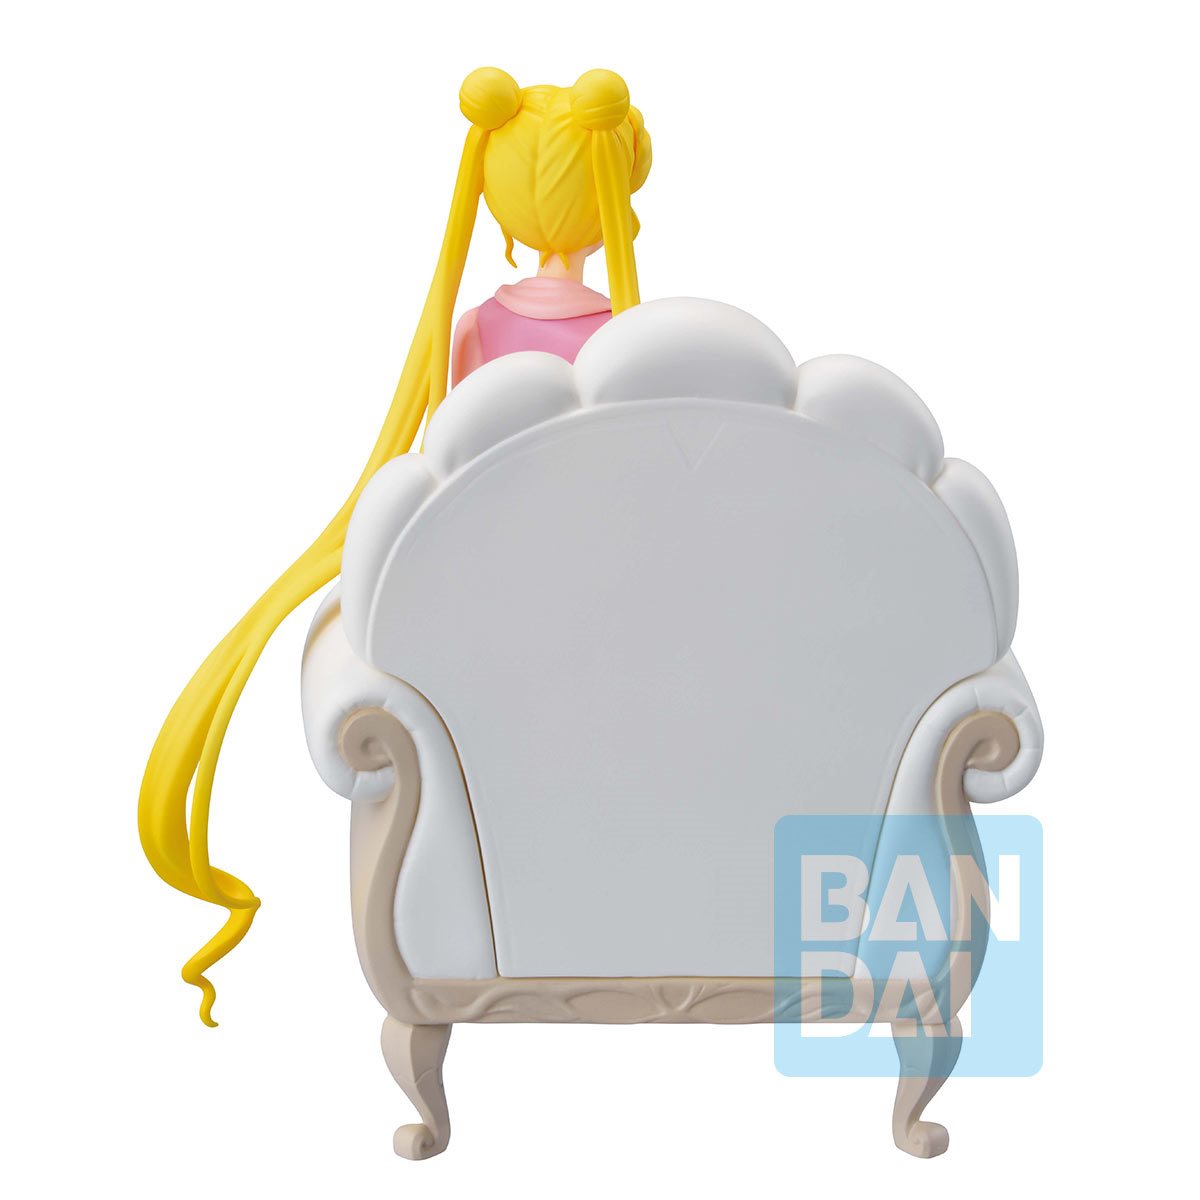 Sailor Moon Cosmos Collectible Brings Usagi's Strongest Weapon to Life